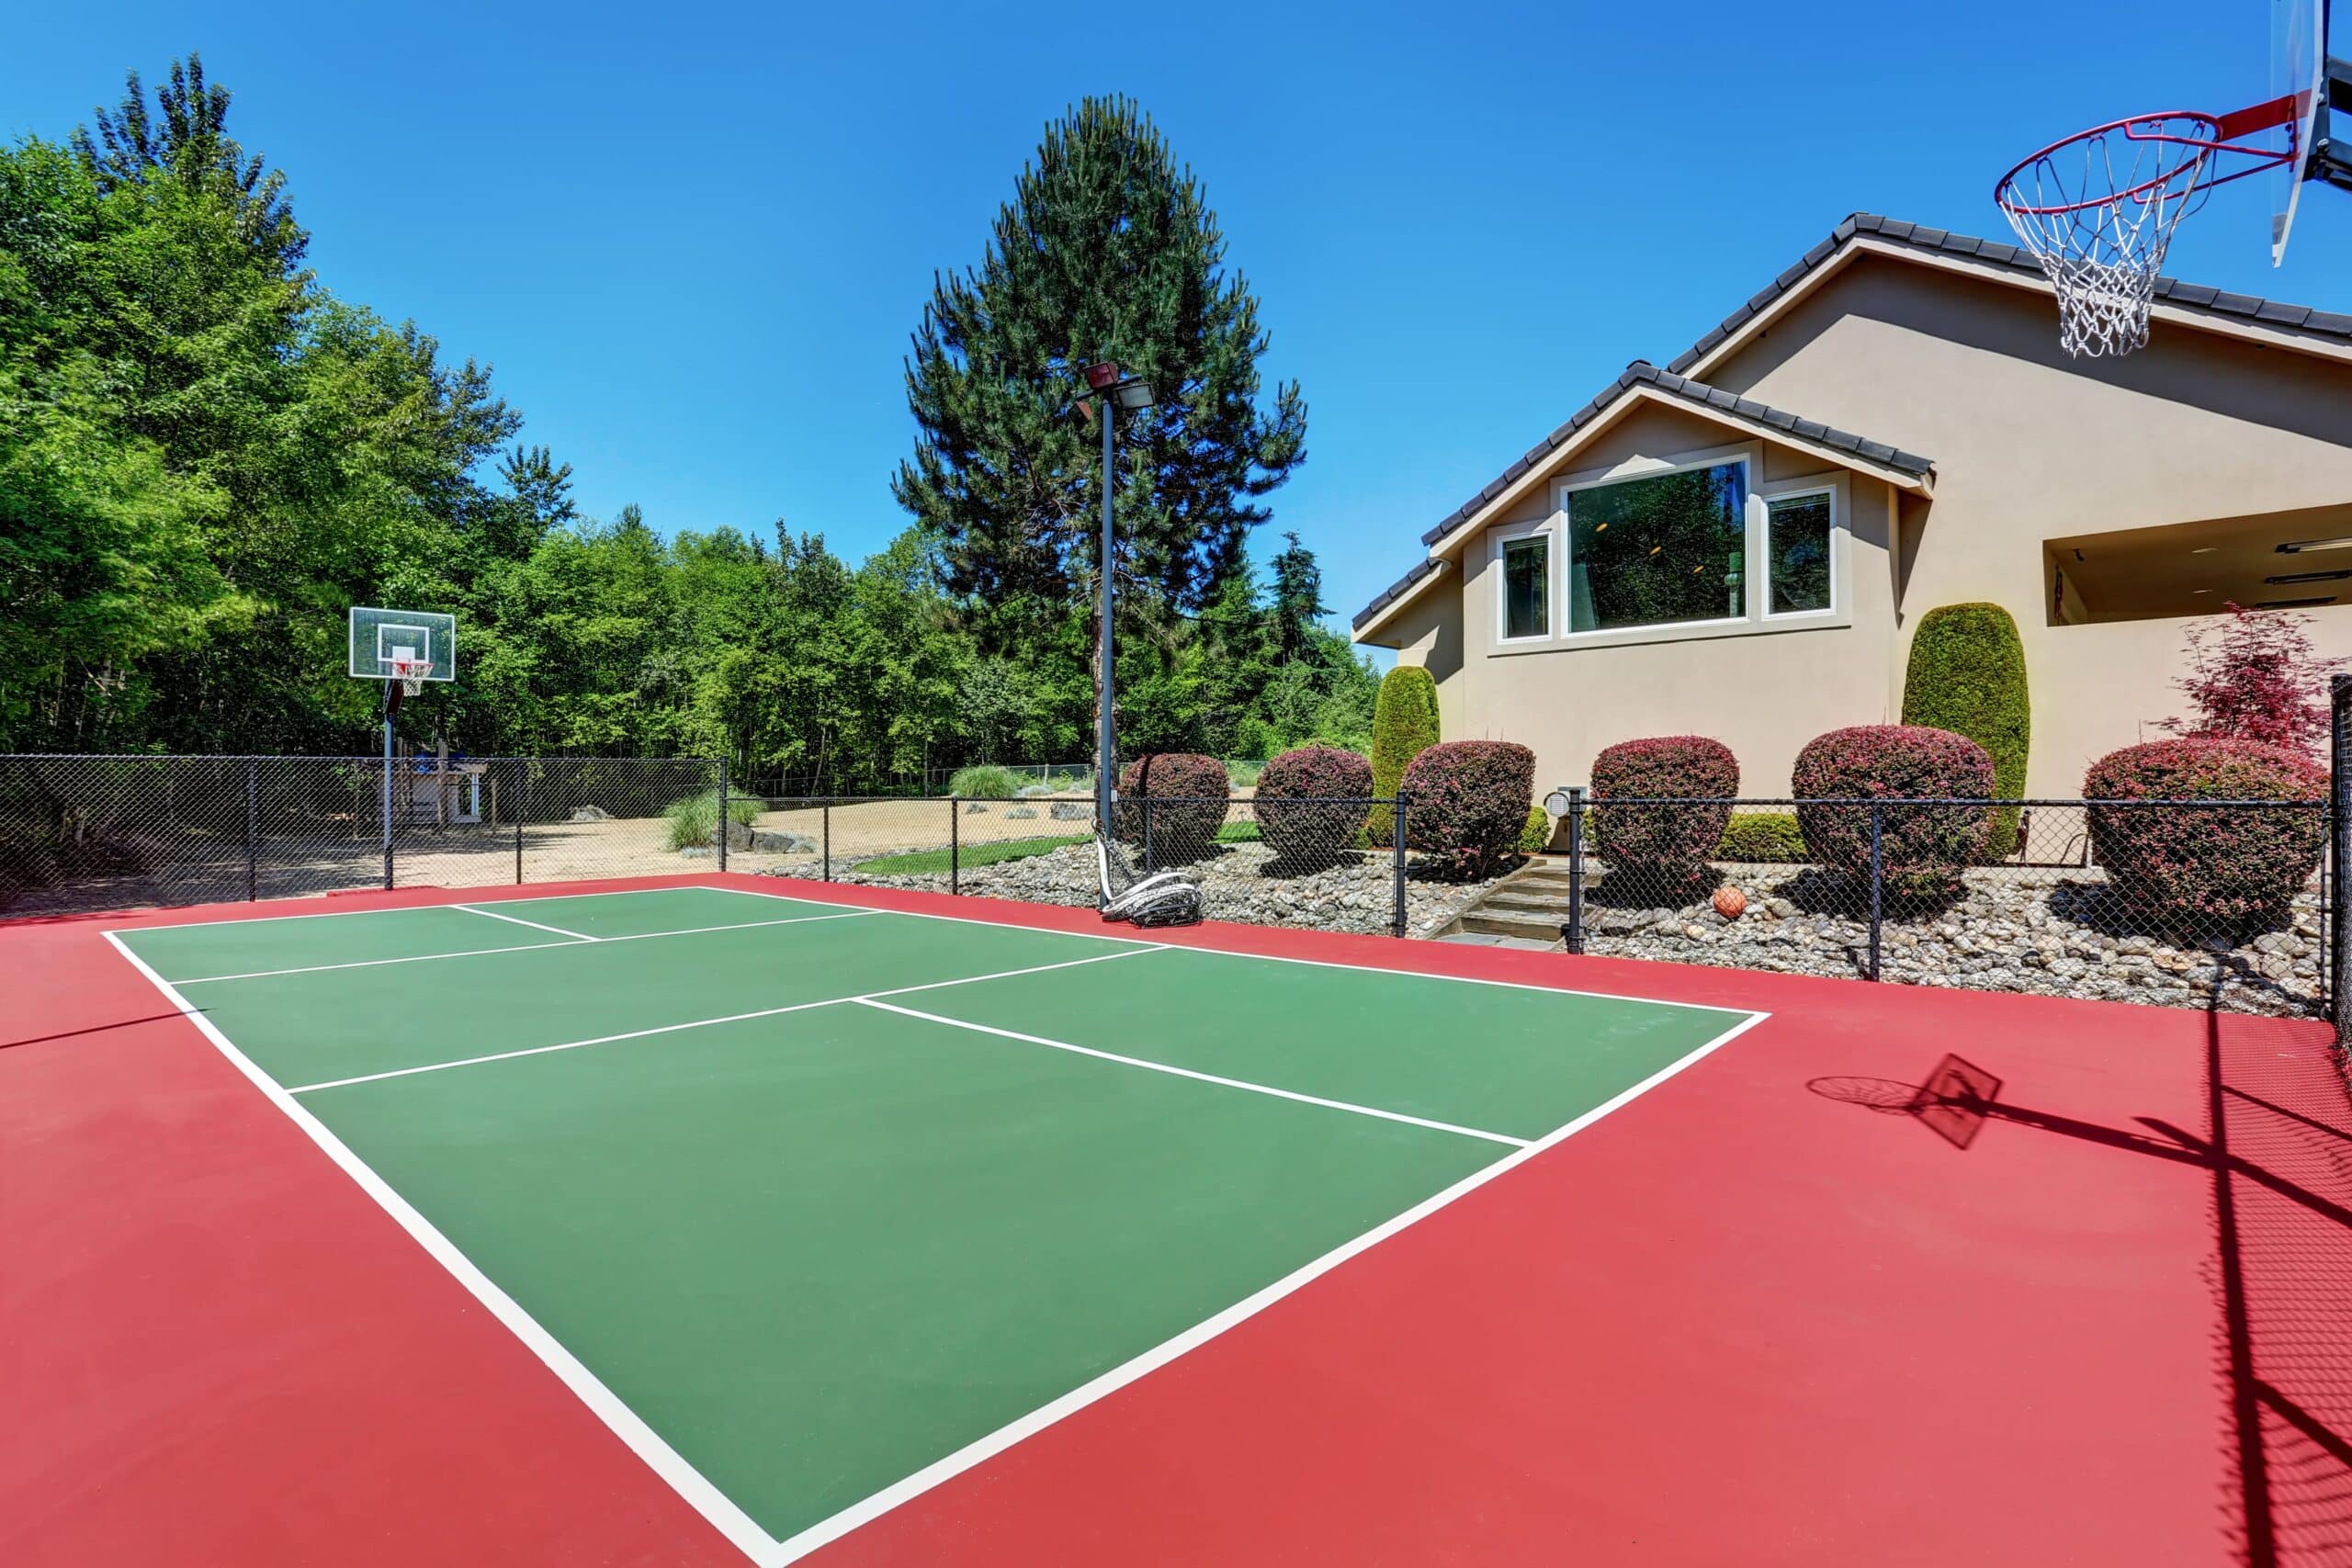 Private backyard outdoor court for basketball, tennis, etc